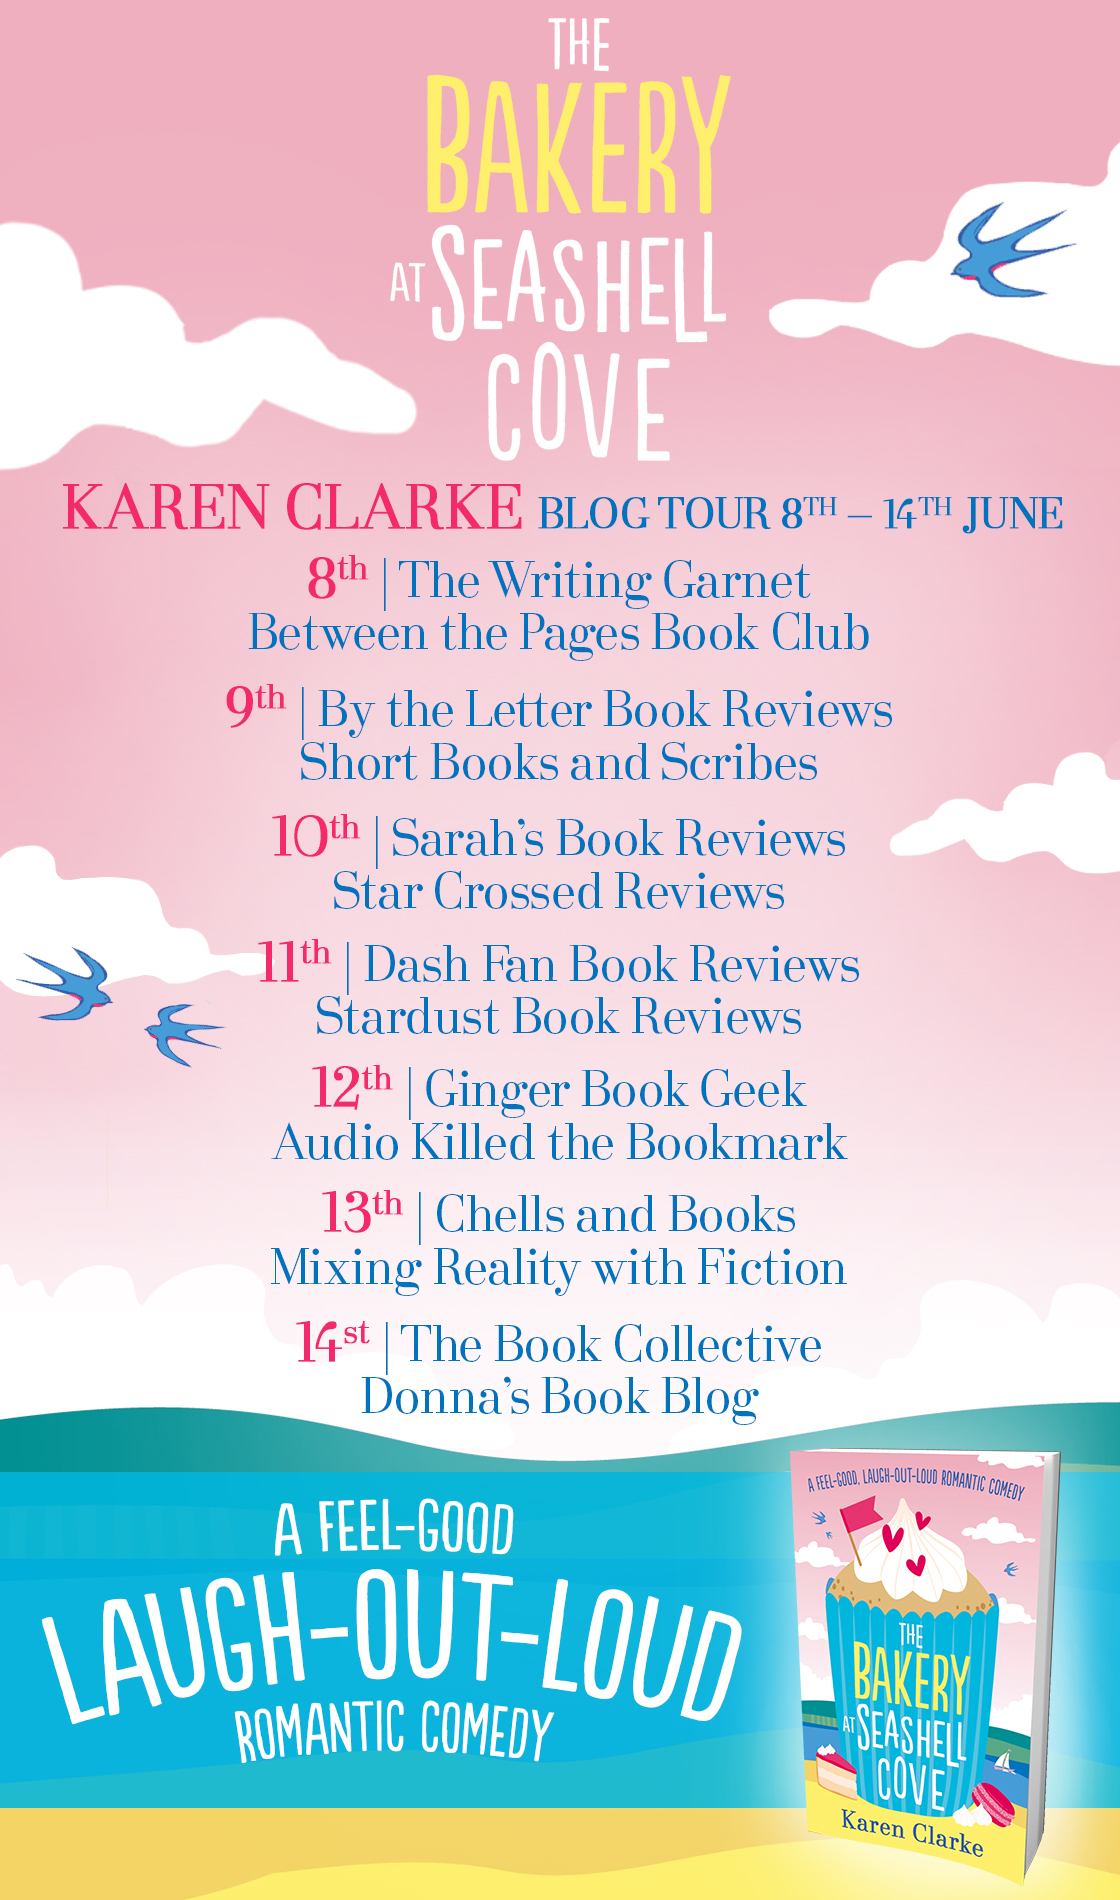 Blog Tour Review: The Bakery at Seashell Cove